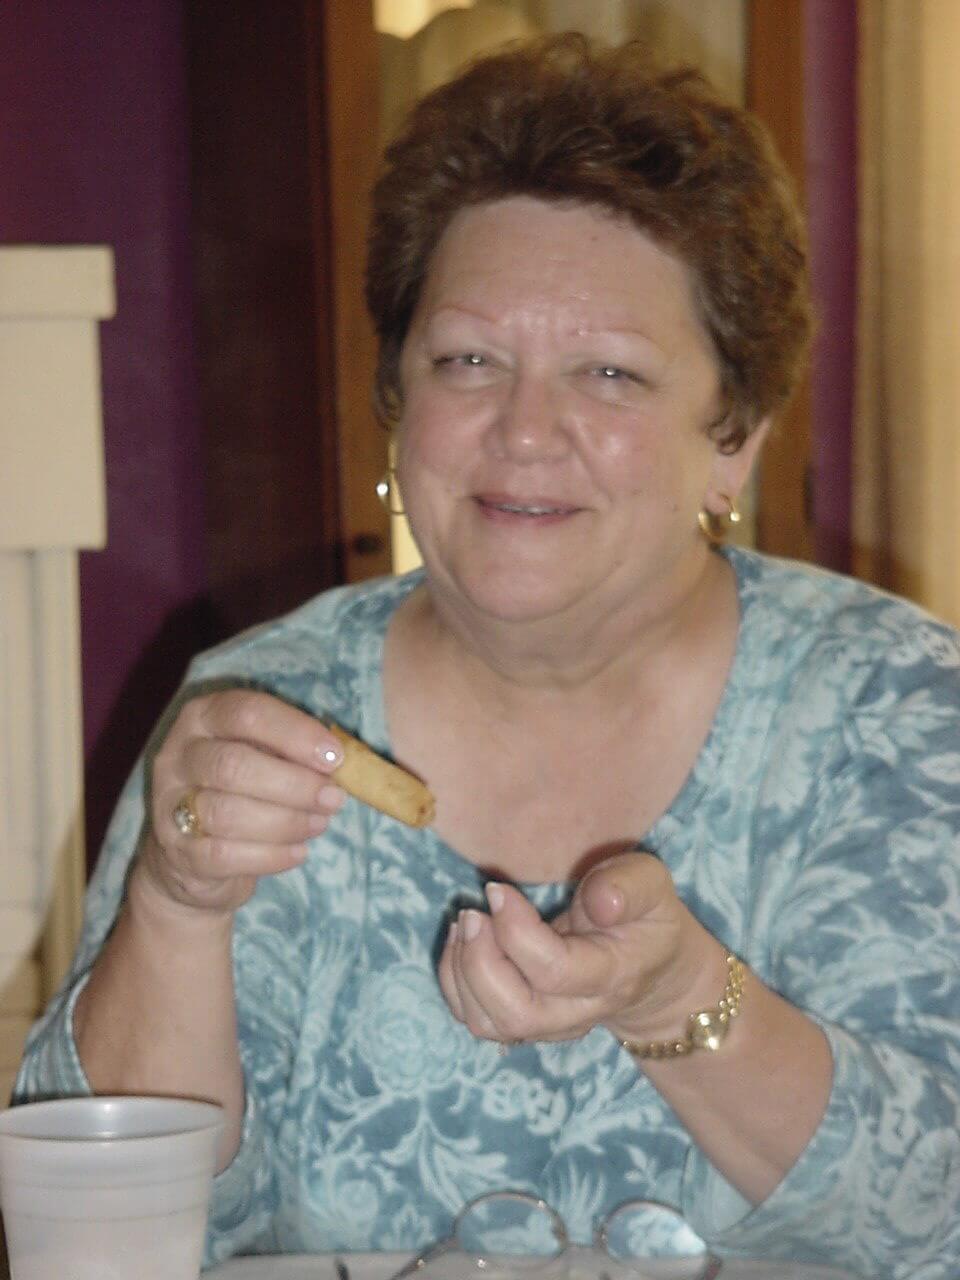 Smiling portrait of a middle-aged woman affected by FXTAS